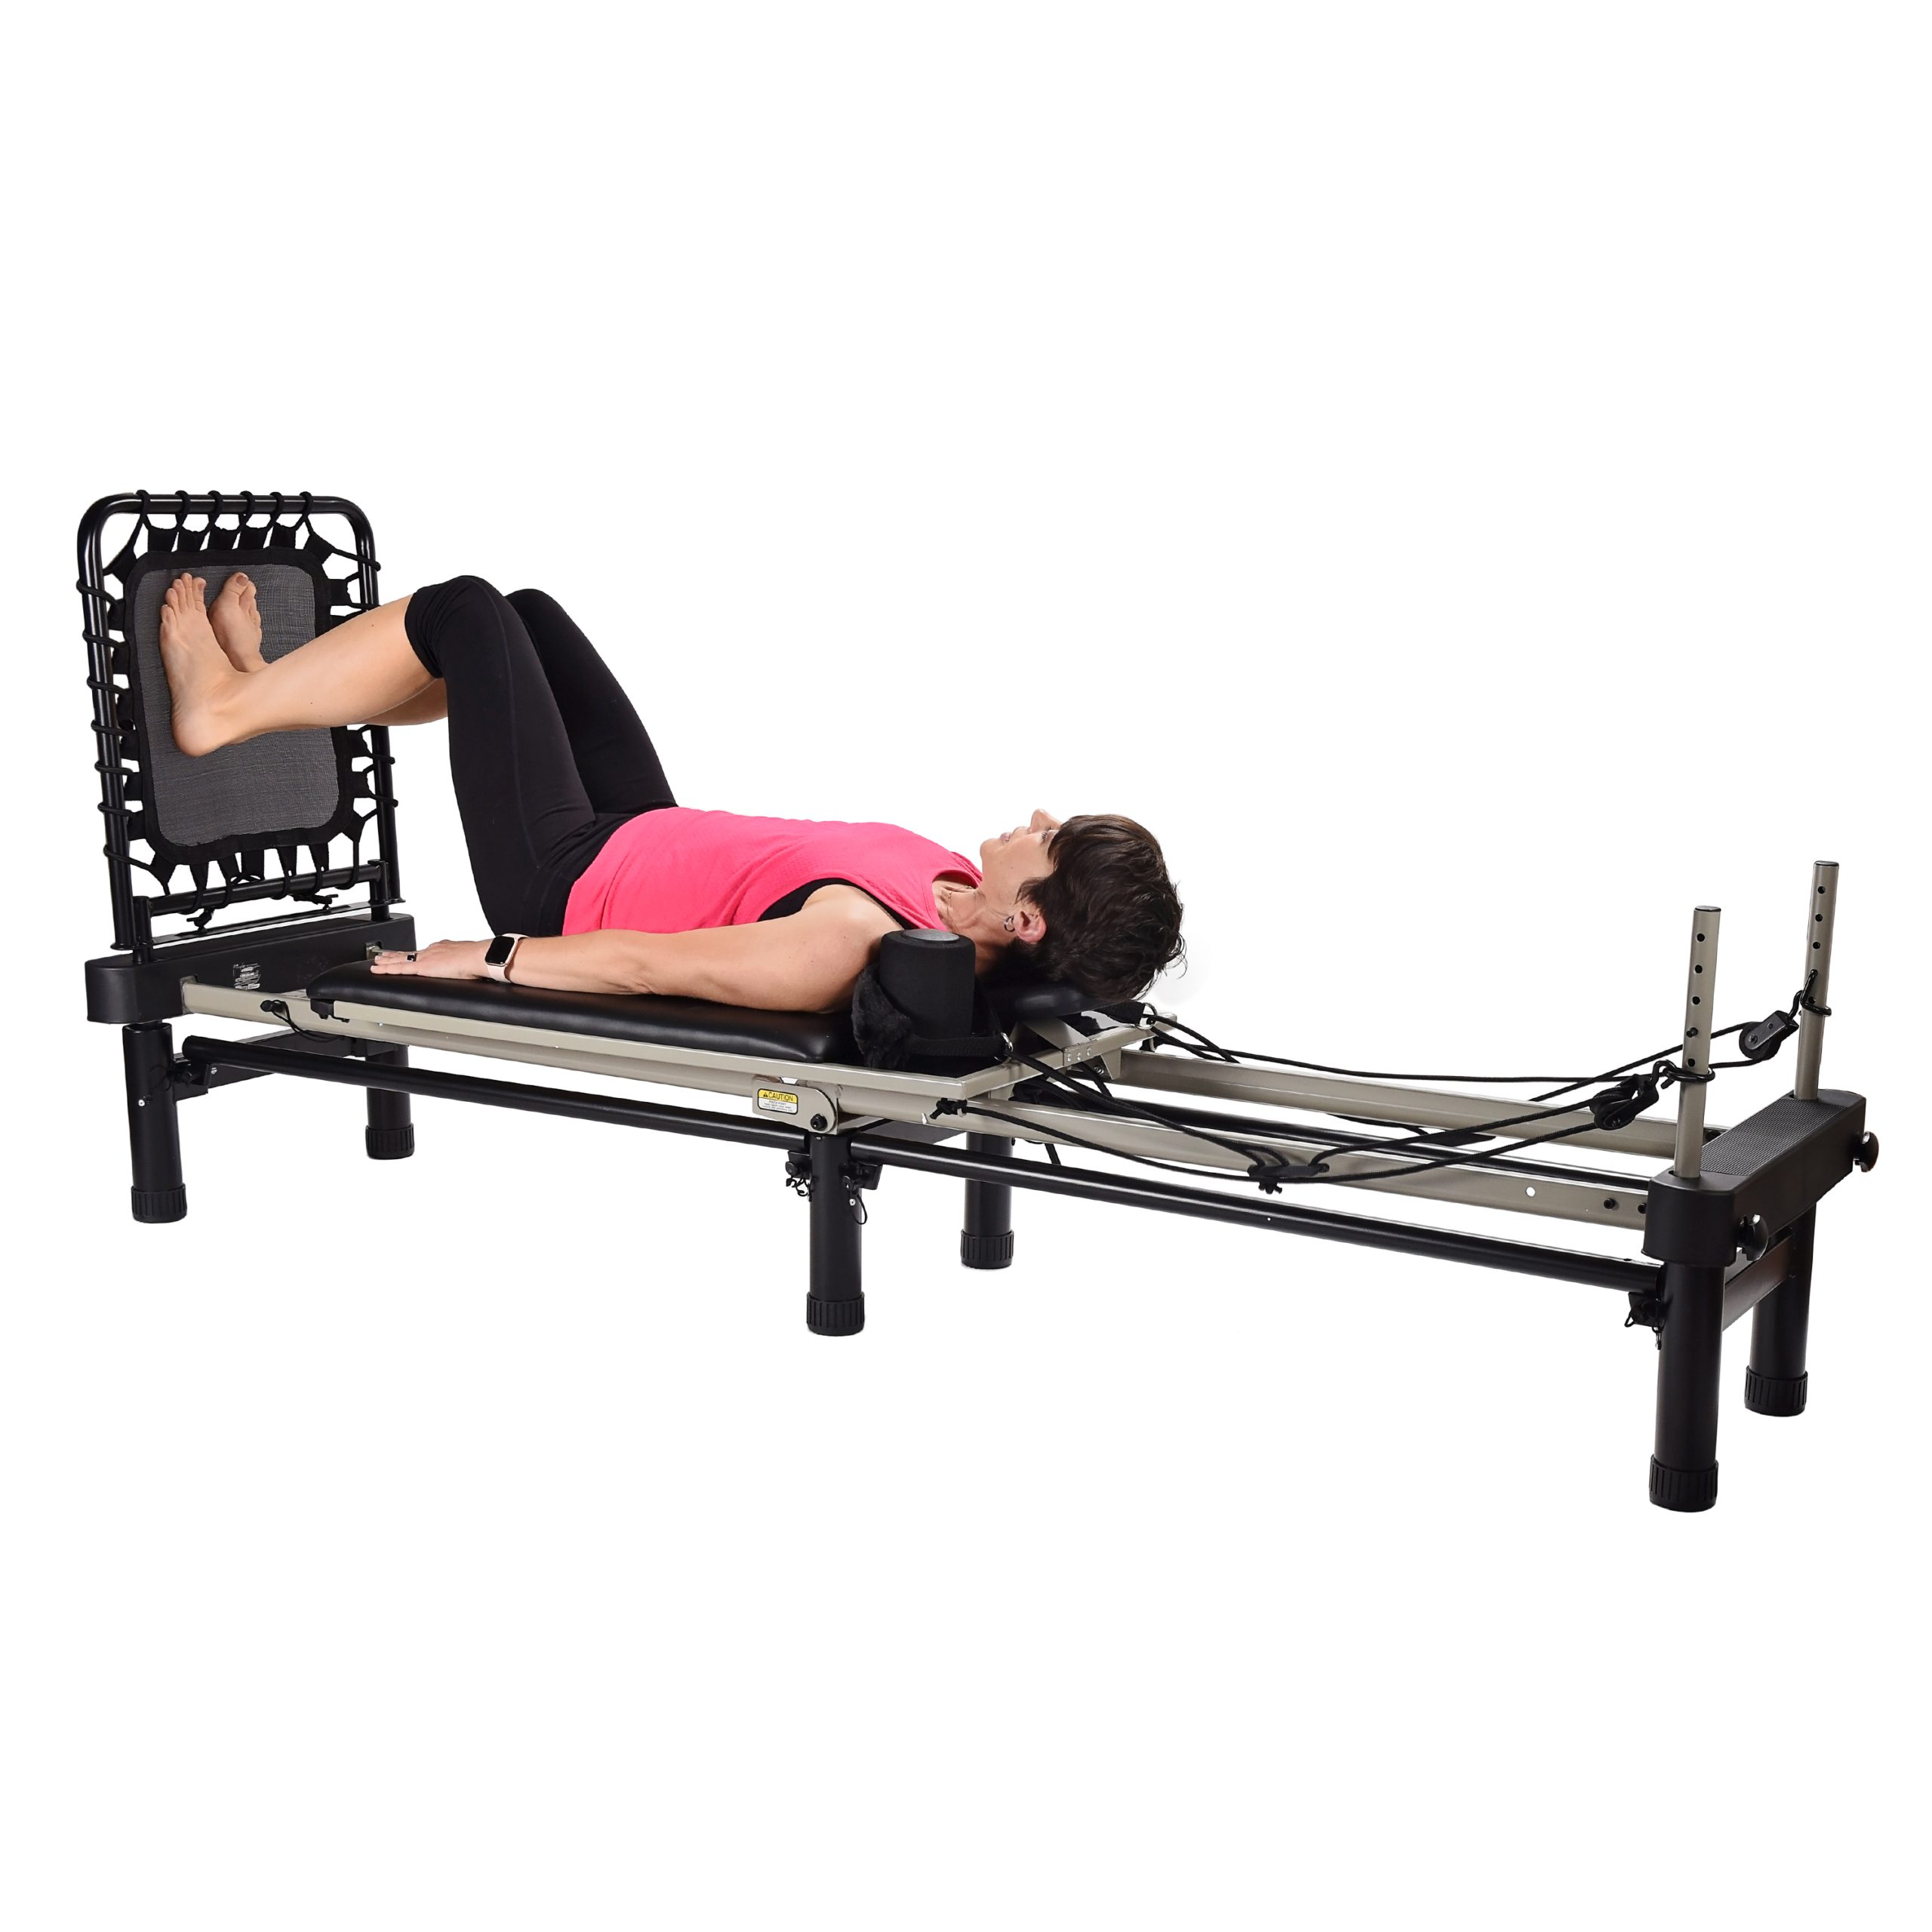 Pilates Equipment for sale : Discover the Complete Pilates